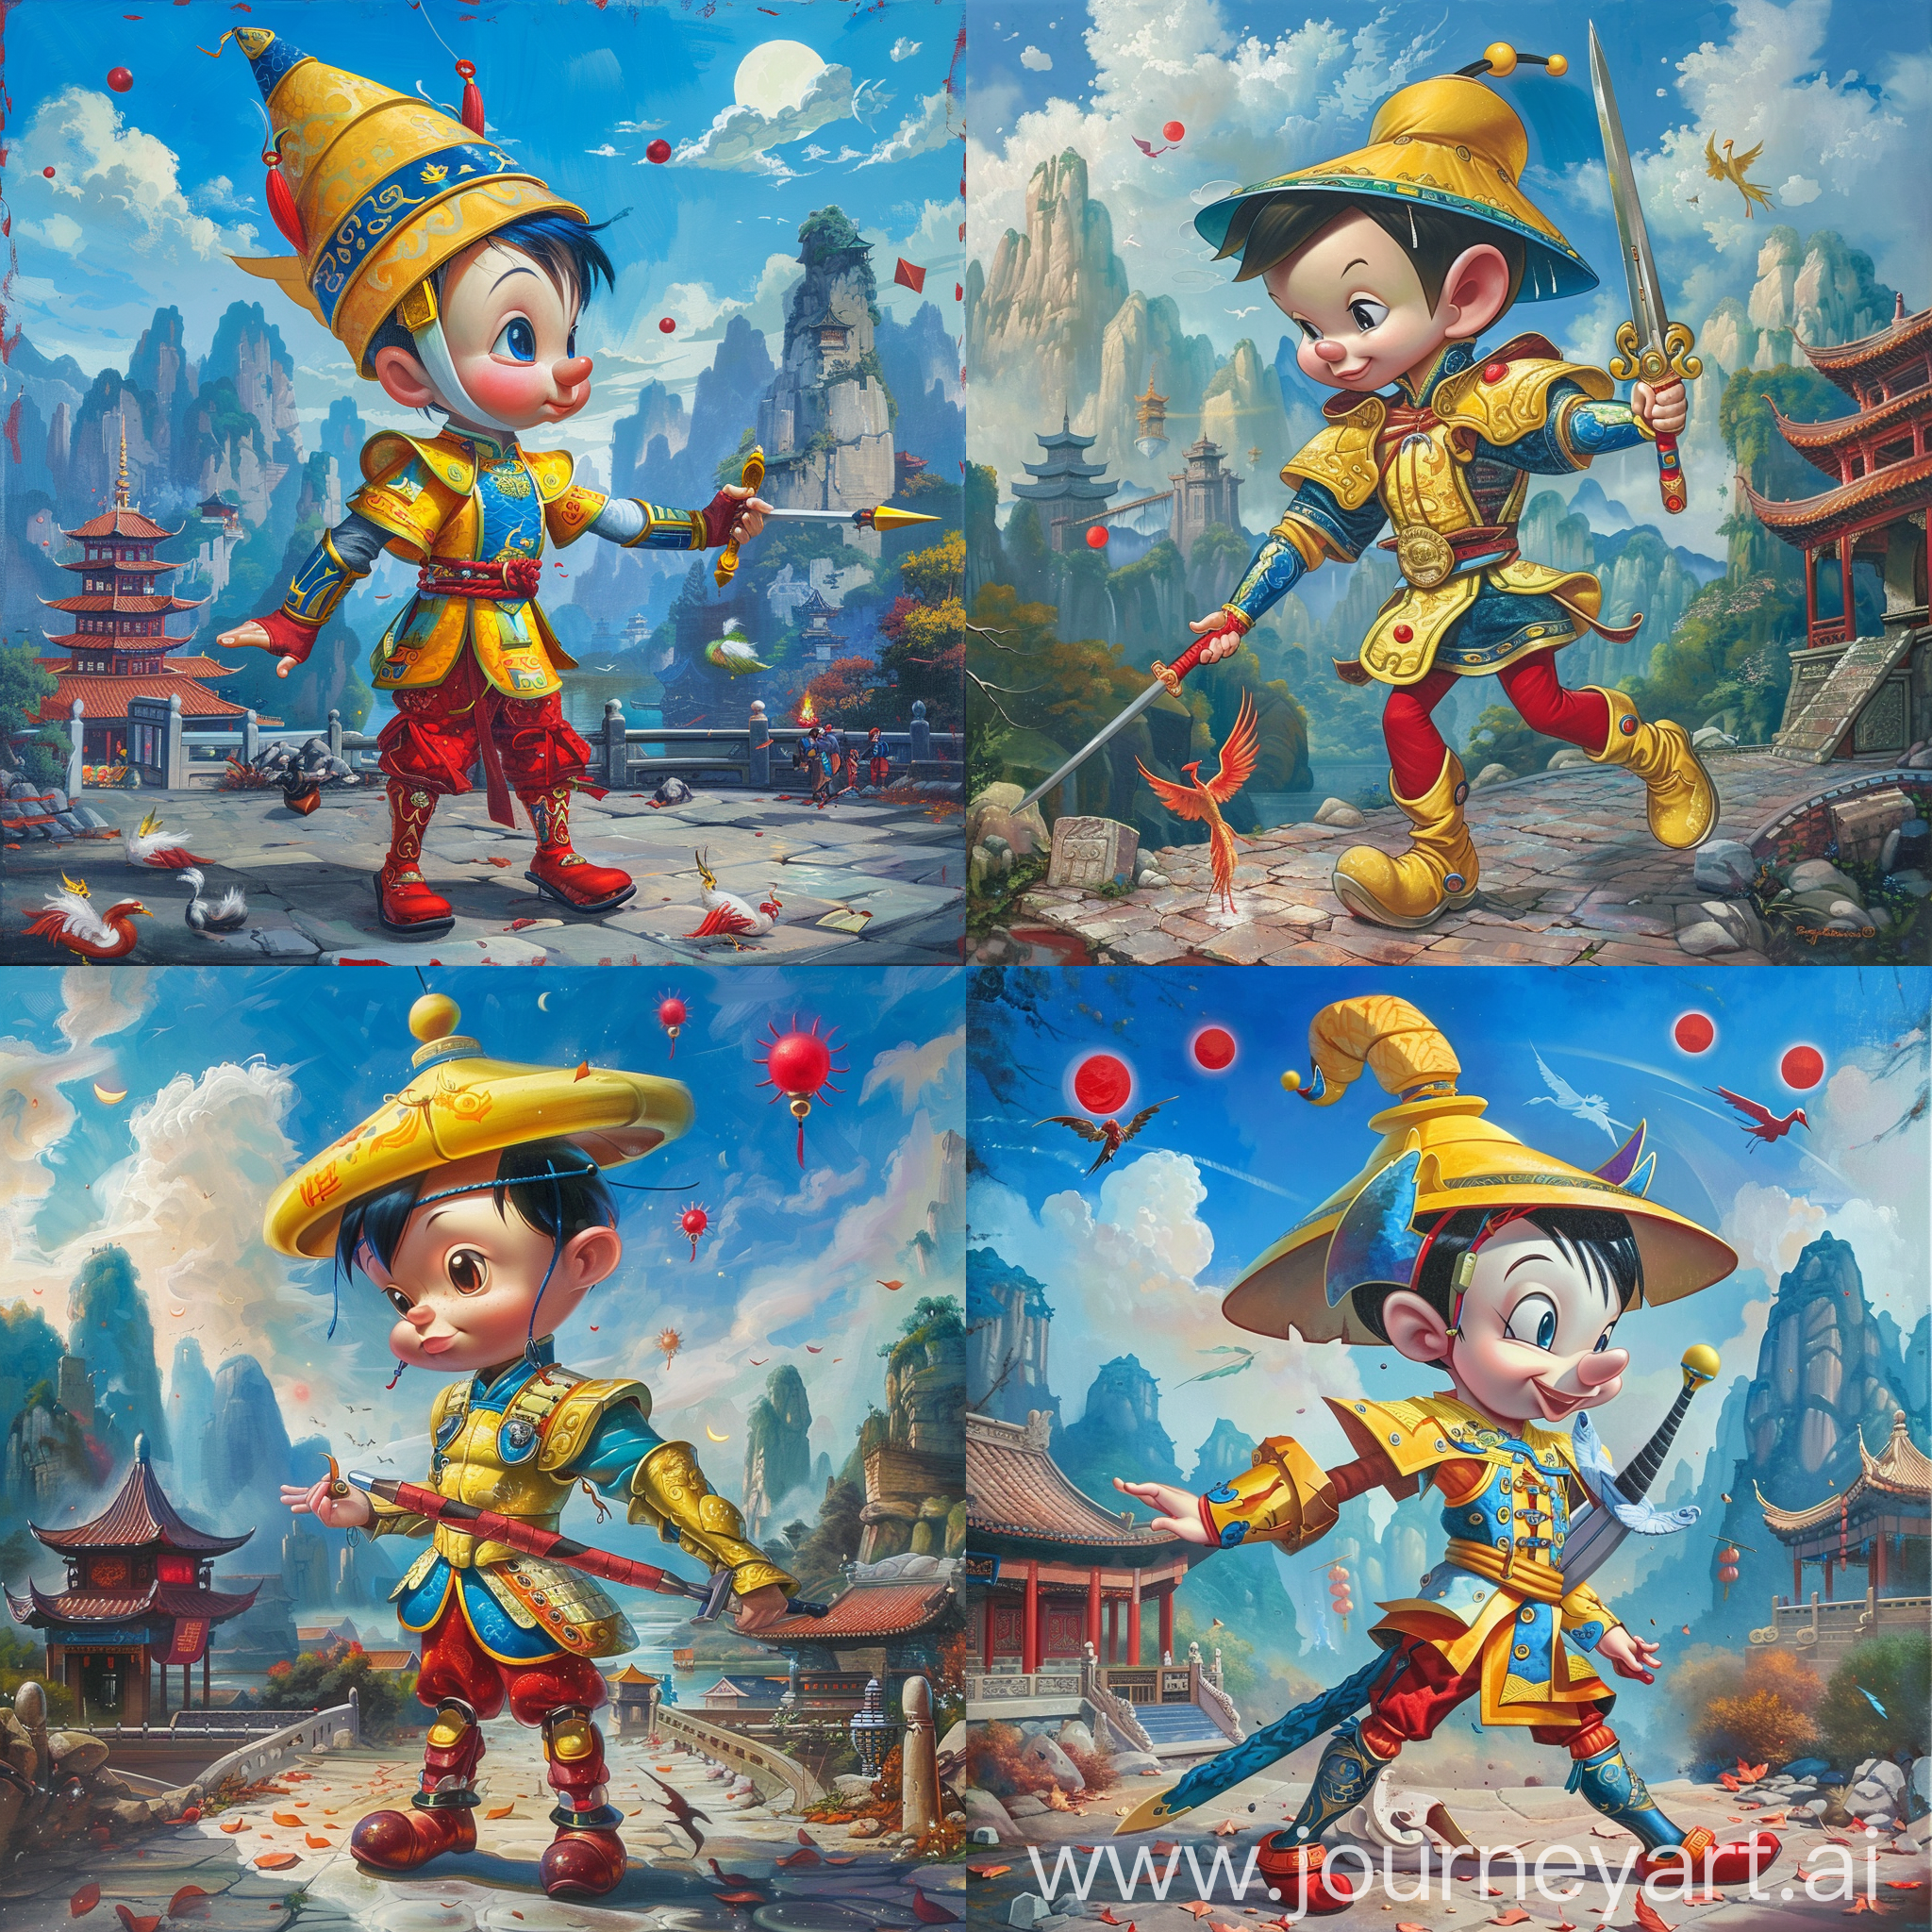 Historic painting style:

a Disney handsome Pinocchio, from Pinocchio cartoon, he has yellow Tang Dynasty hat, he wears yellow and blue color Chinese style medieval armor, red pants and boots, he holds a Chinese sword in right hand, 

Chinese Guilin mountains and temple as background, small phoenix and three small red suns in blue sky.